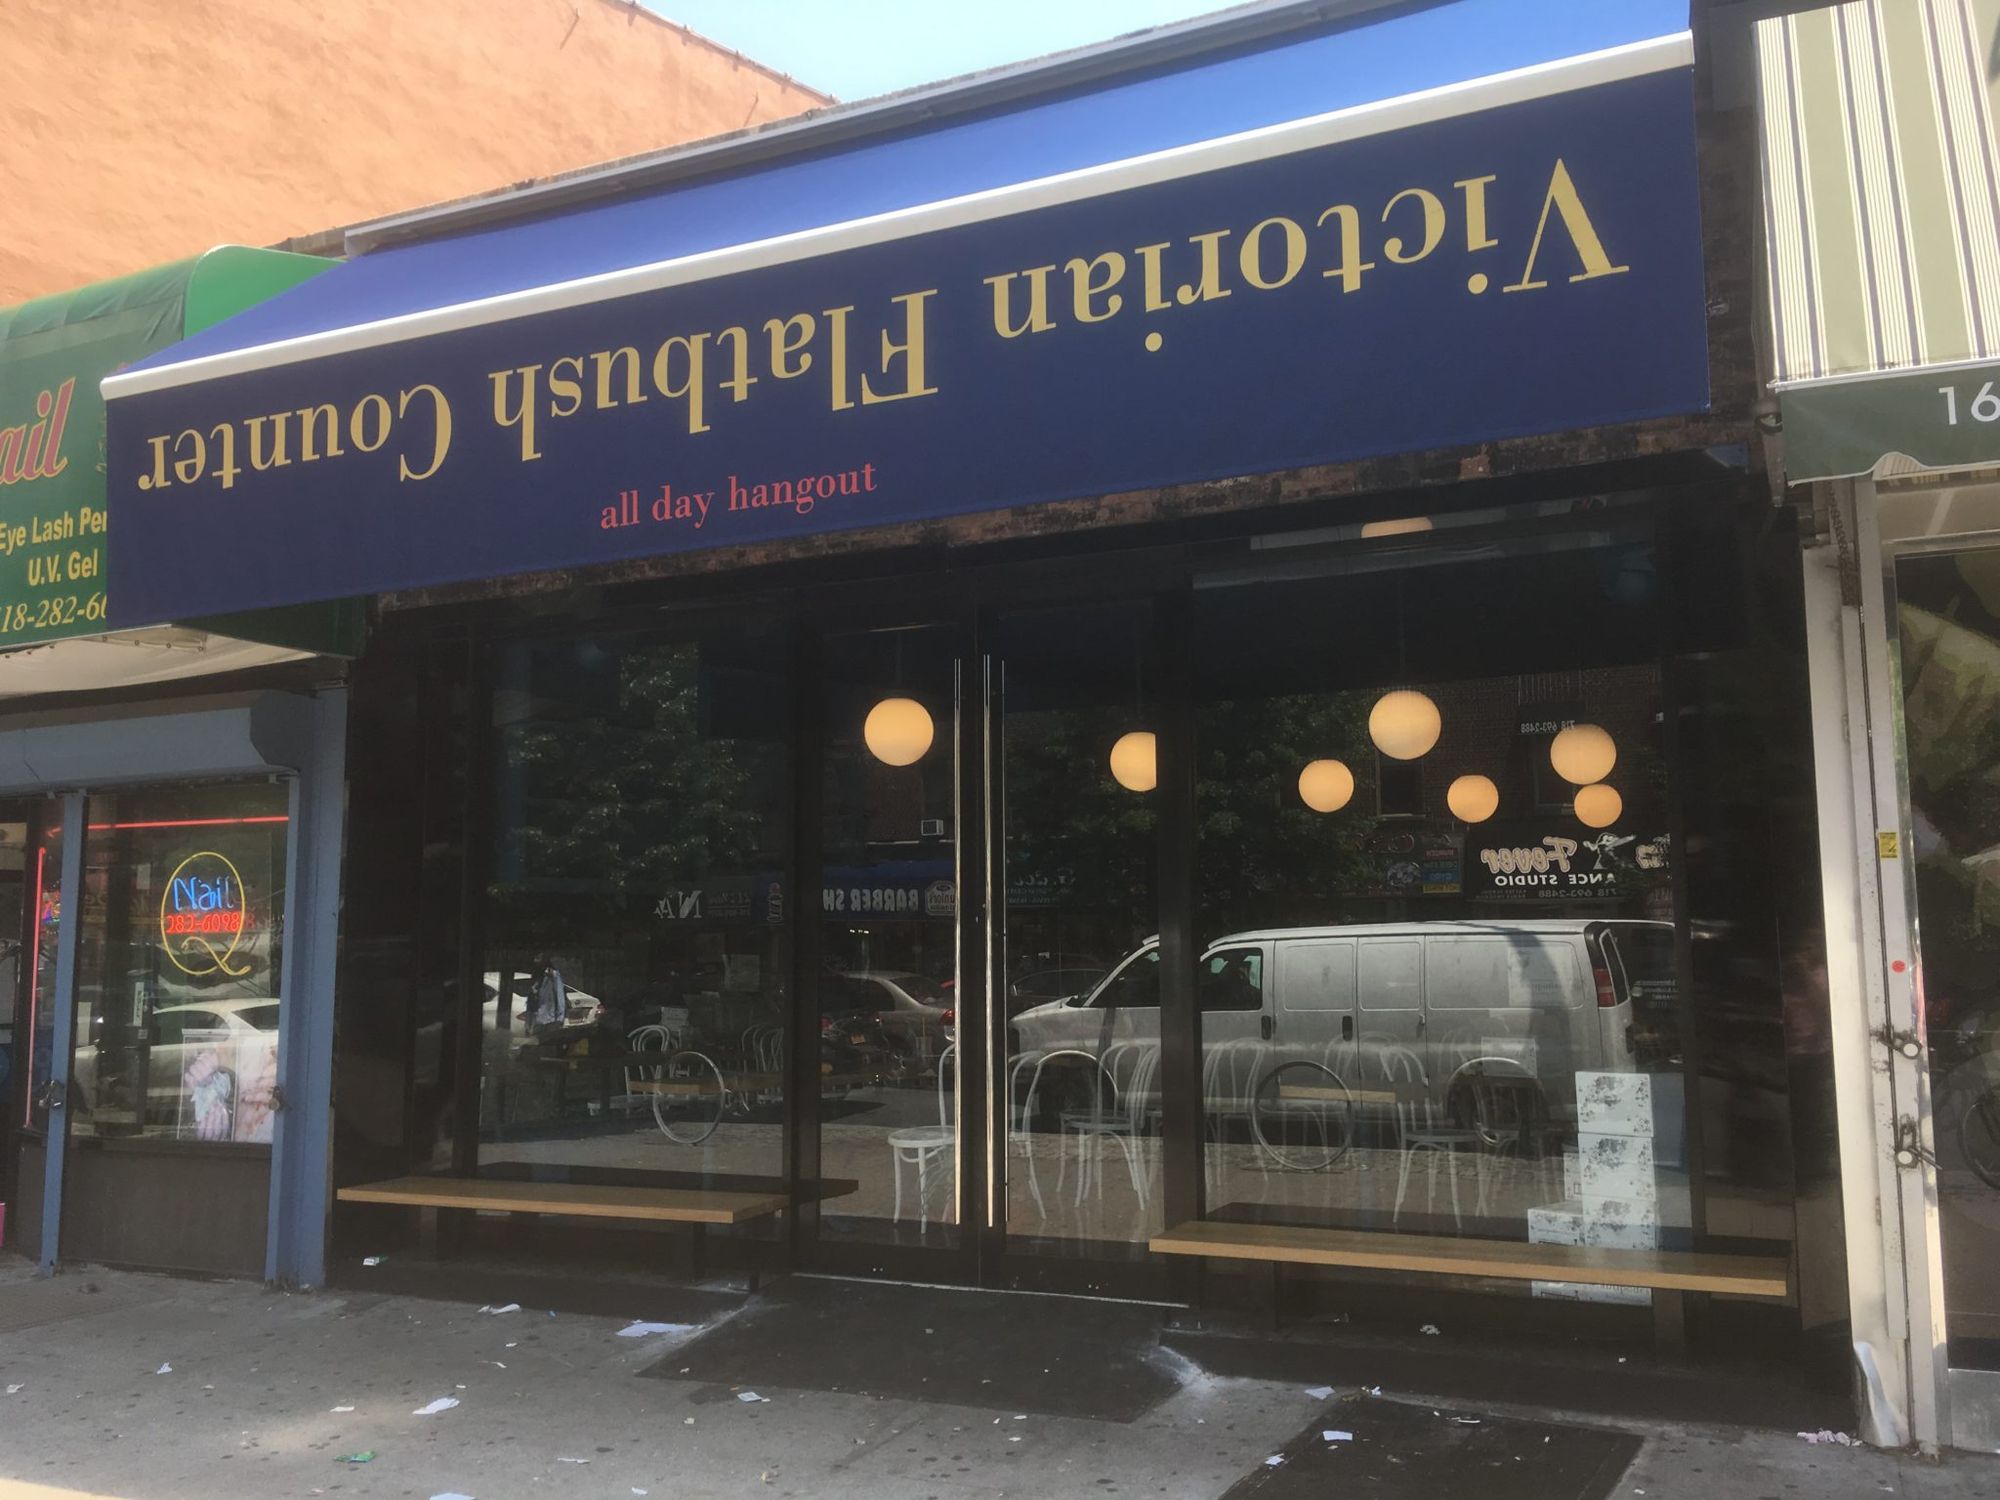 New “All Day Hangout” Cafe Coming To Cortelyou Road